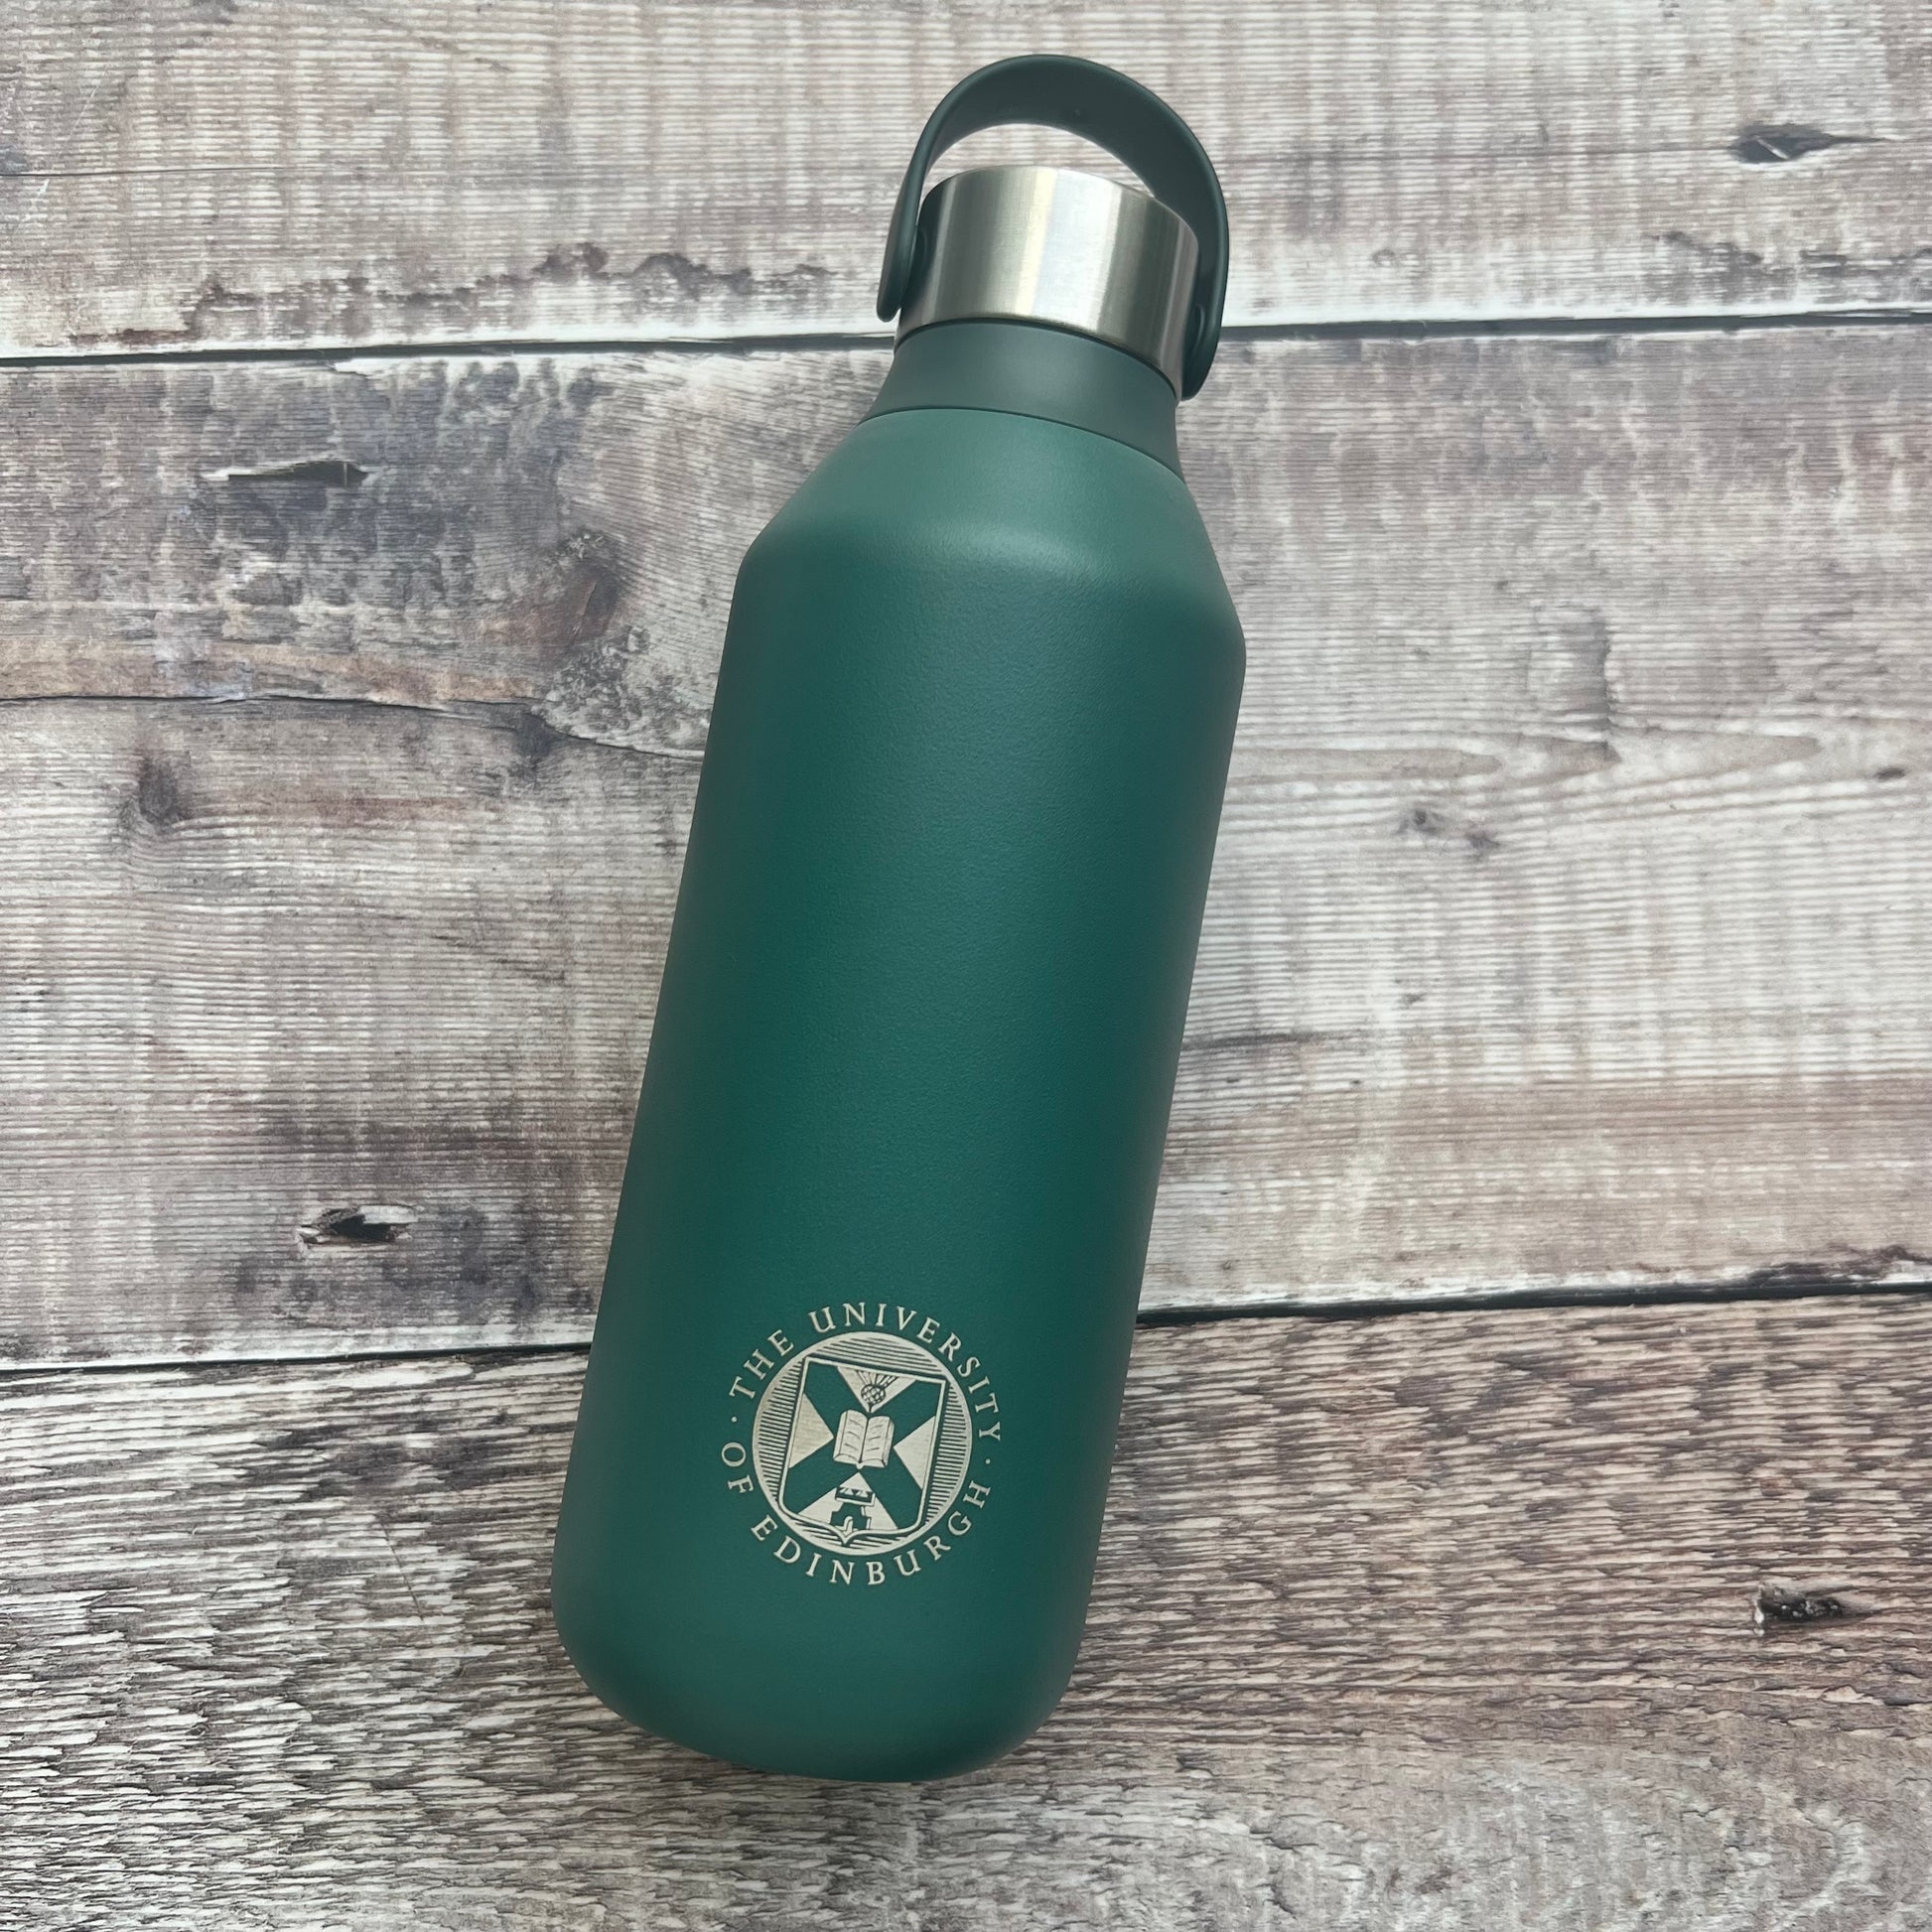 Green chillys bottle with the university crest engraved